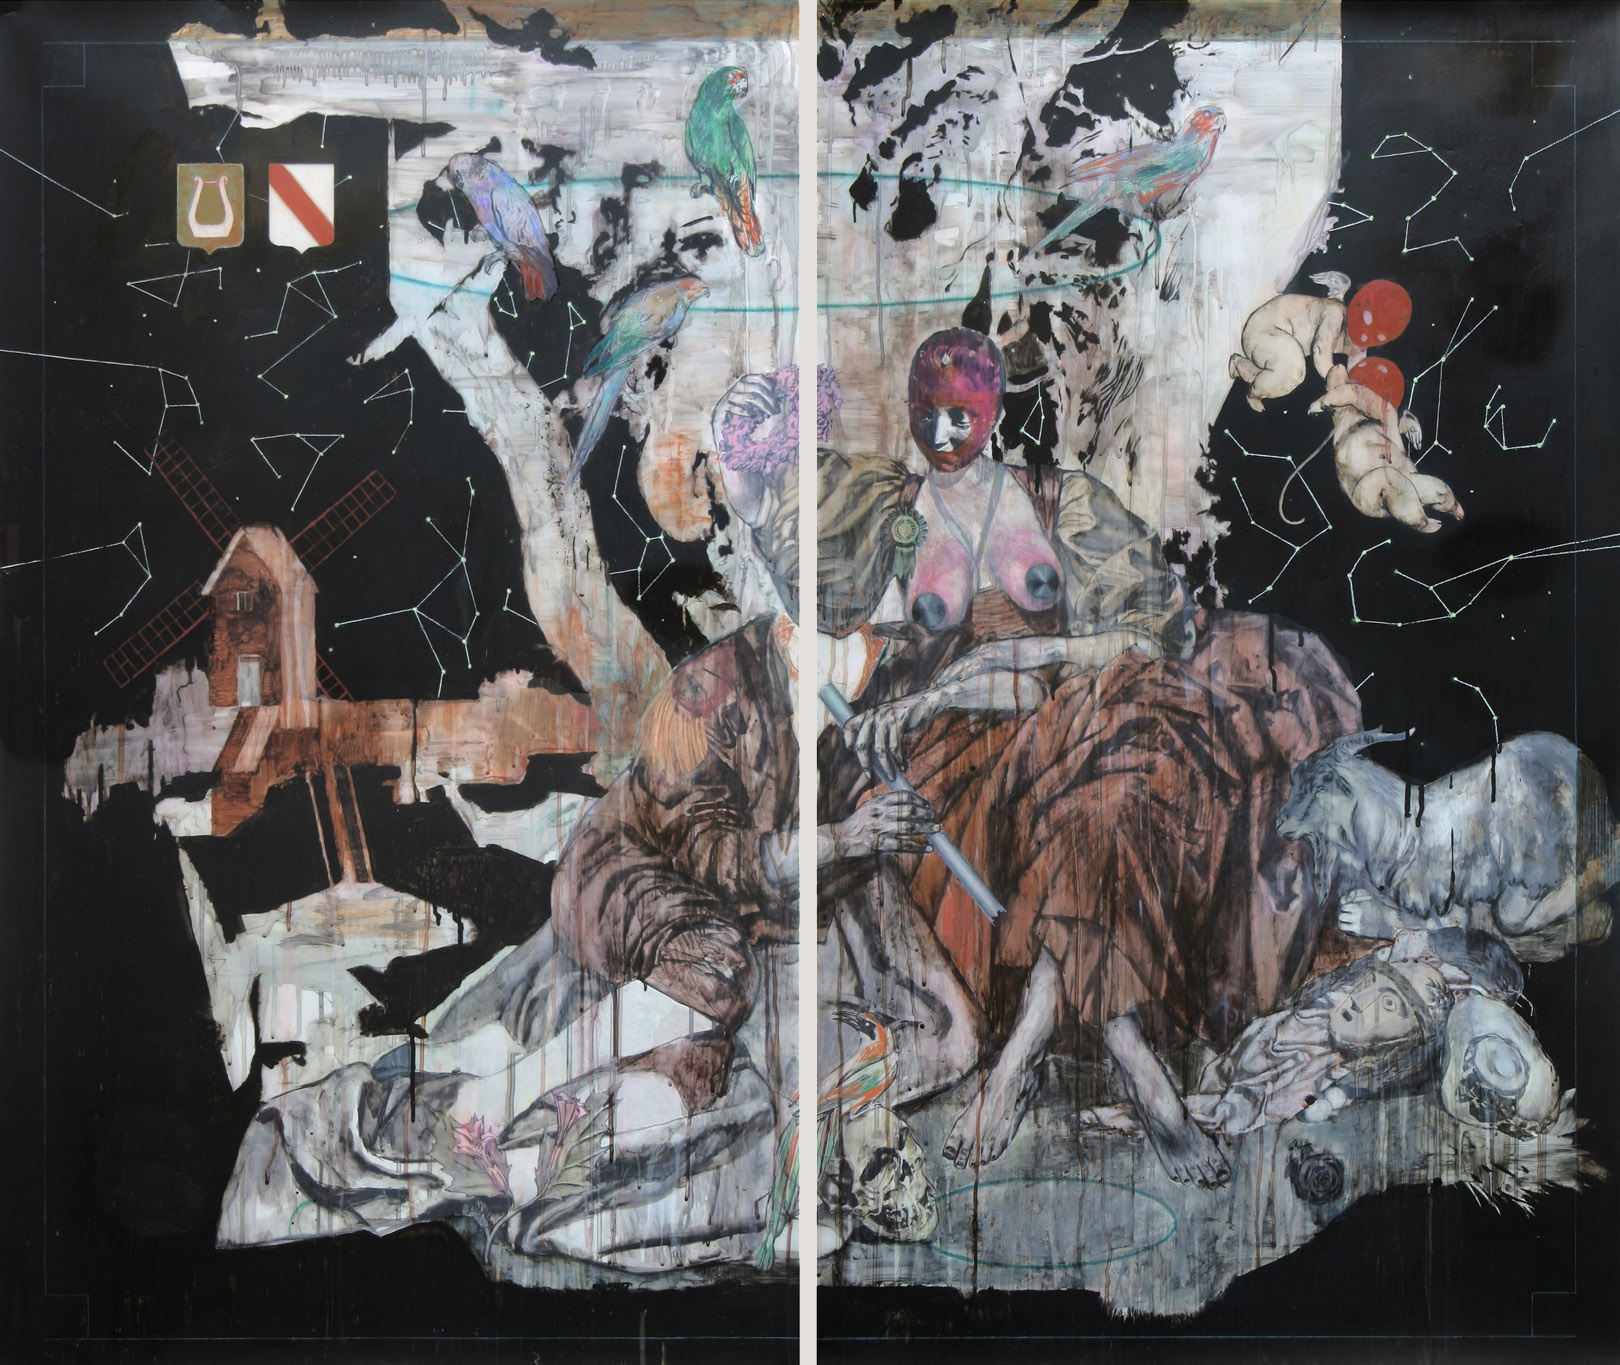   Pastorale II (d'après Boucher)  2015, Mixed media on drafting film 128 x 150 cm (on two panels) 